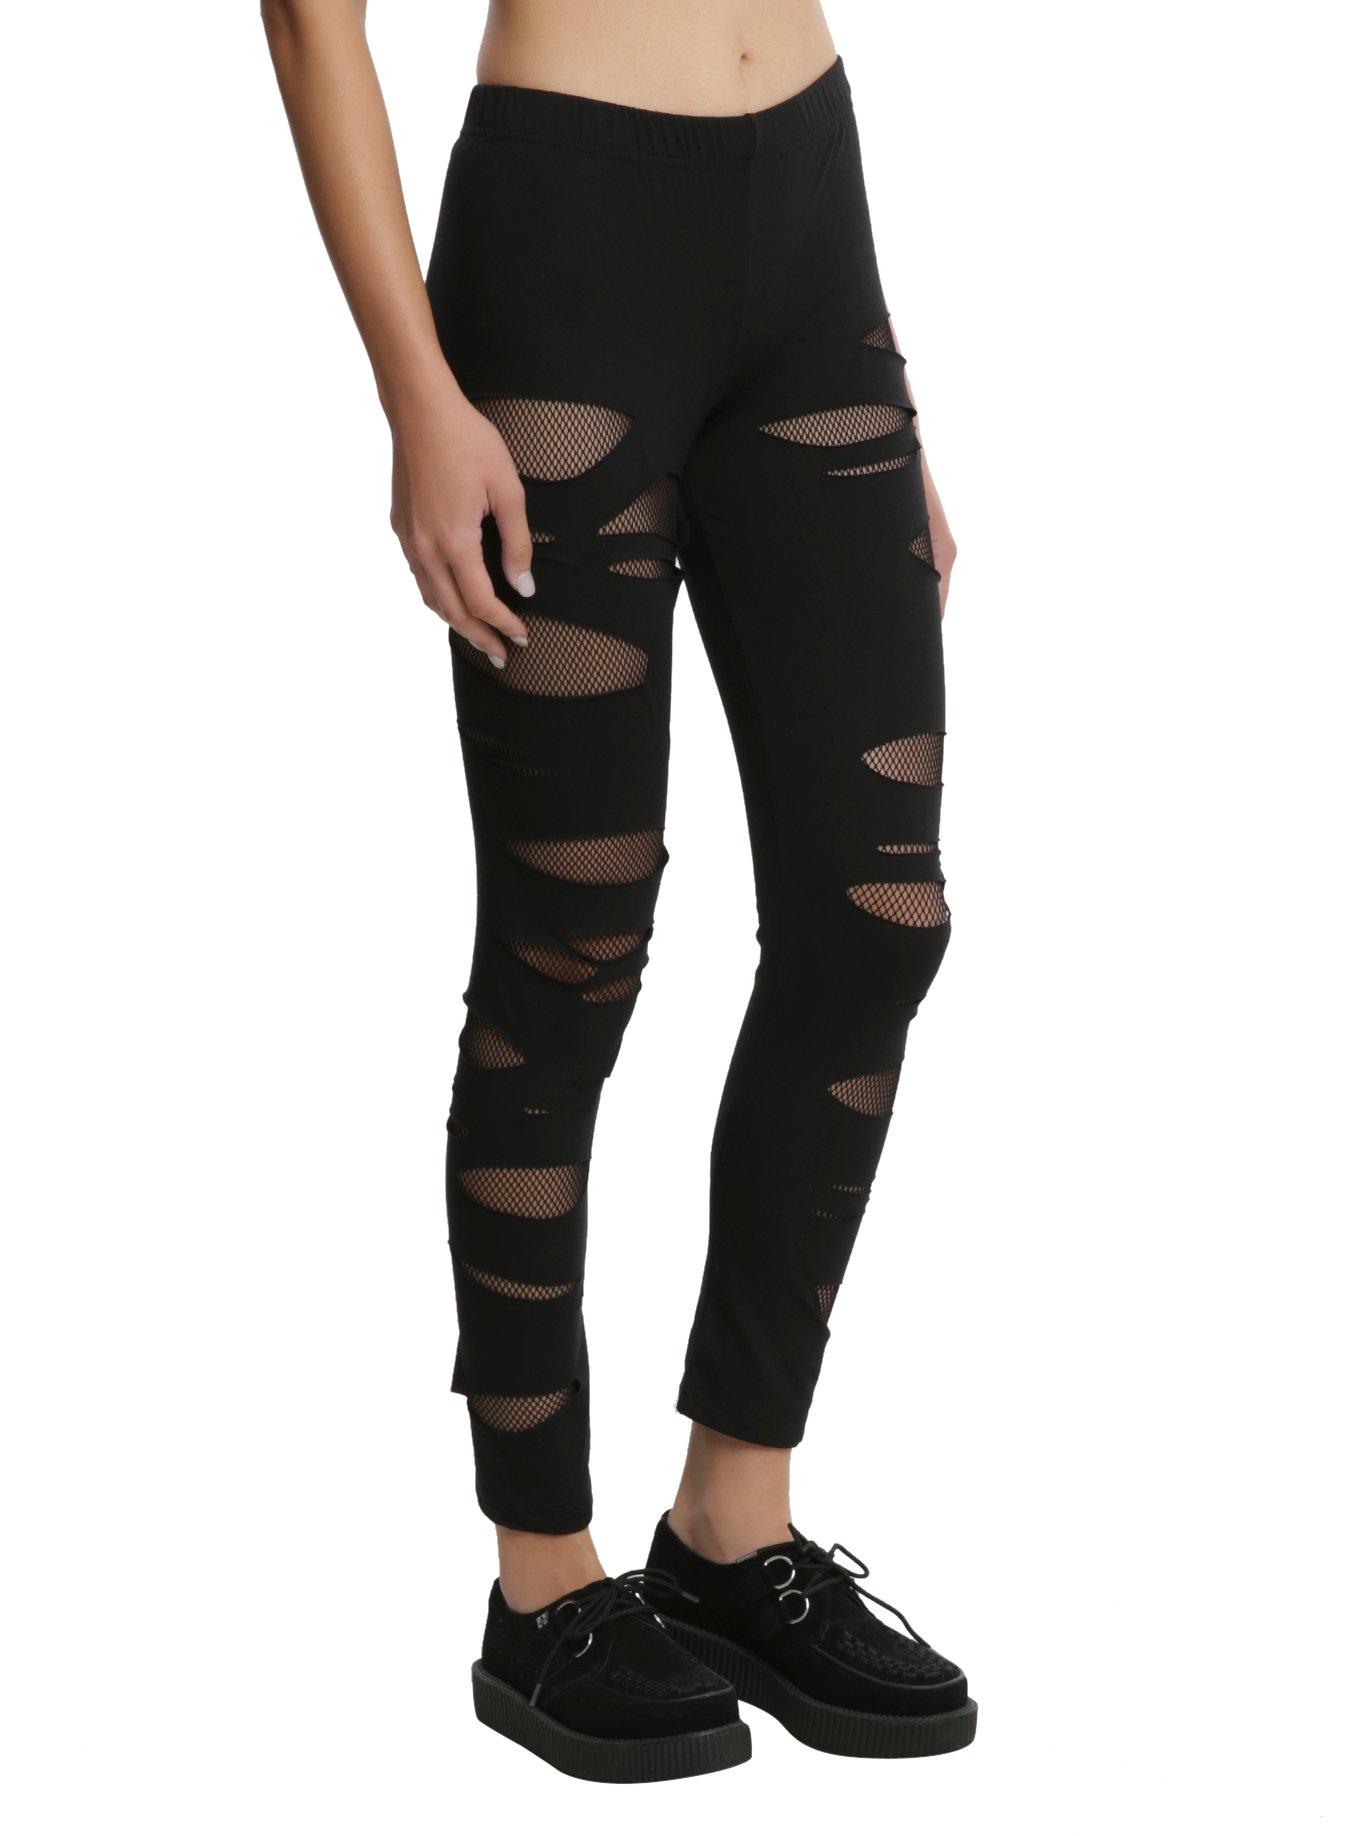  Leggings With Fishnet Cutouts